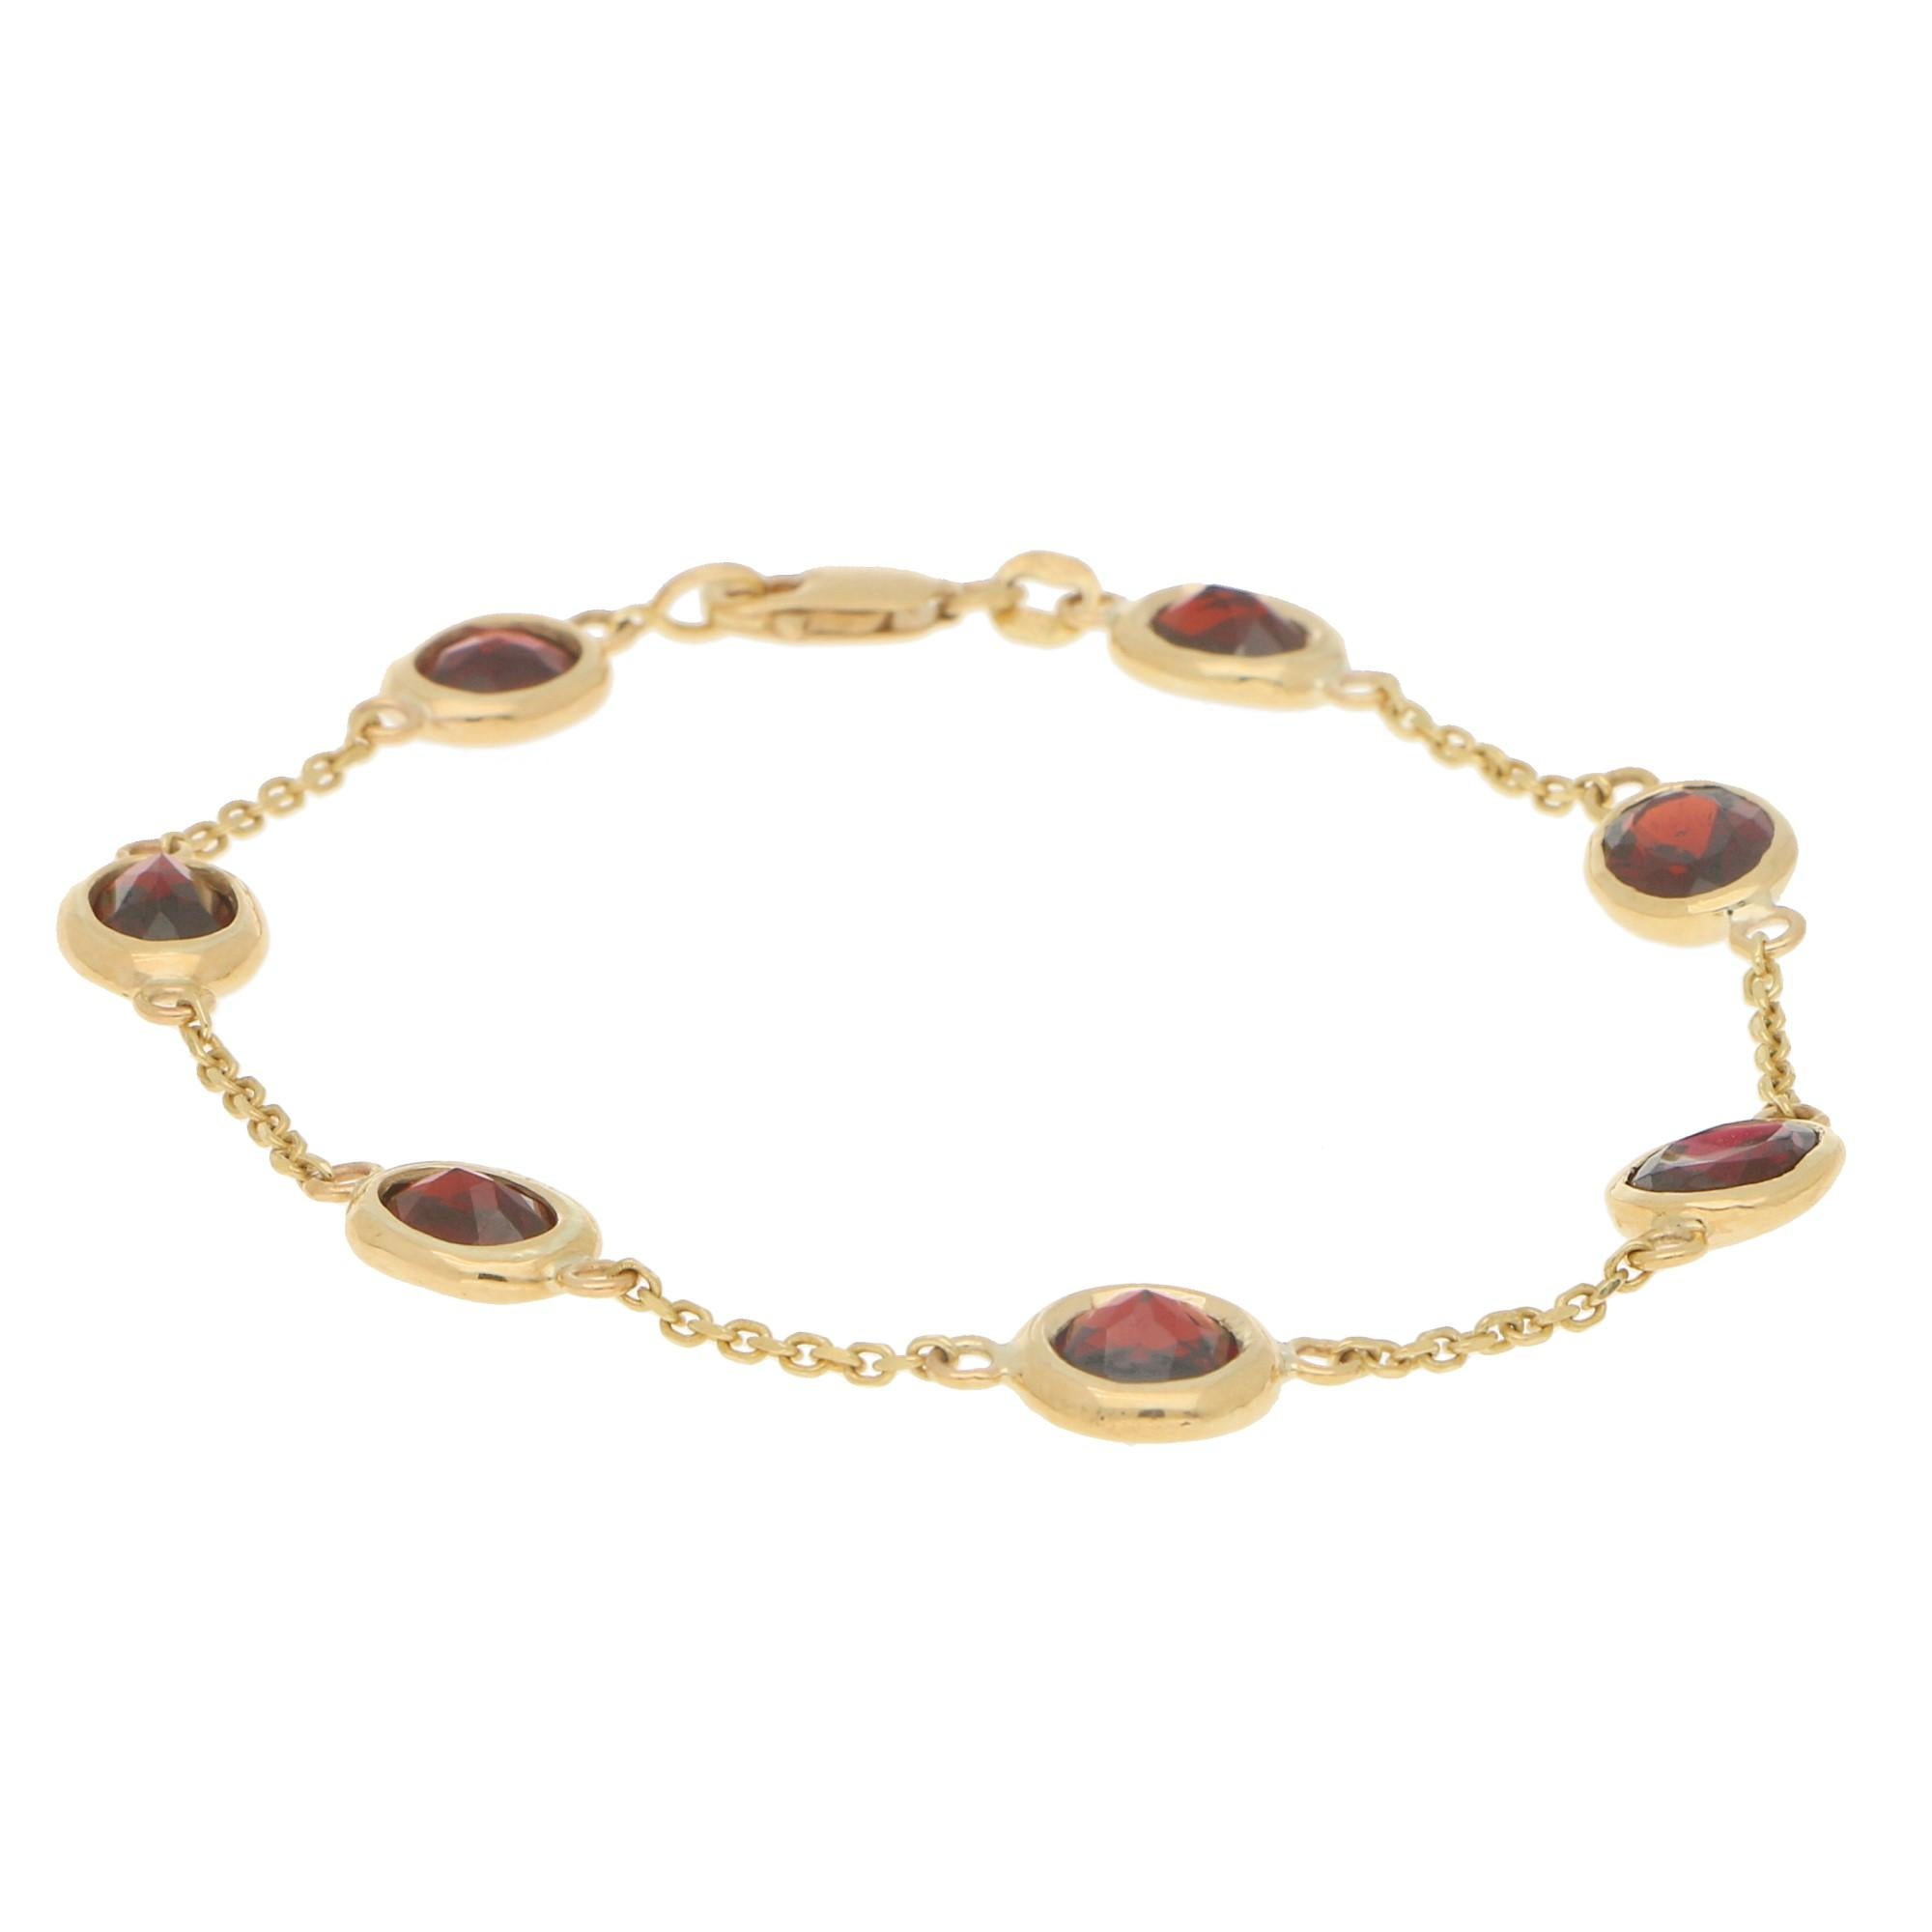 A beautiful red garnet spectacle bracelet set in 9k yellow gold. The piece is composed of 7 unique garnets all varying in size and cut. Each stone is rub over set in yellow gold which allows the wearer to fully appreciate each garnet from both